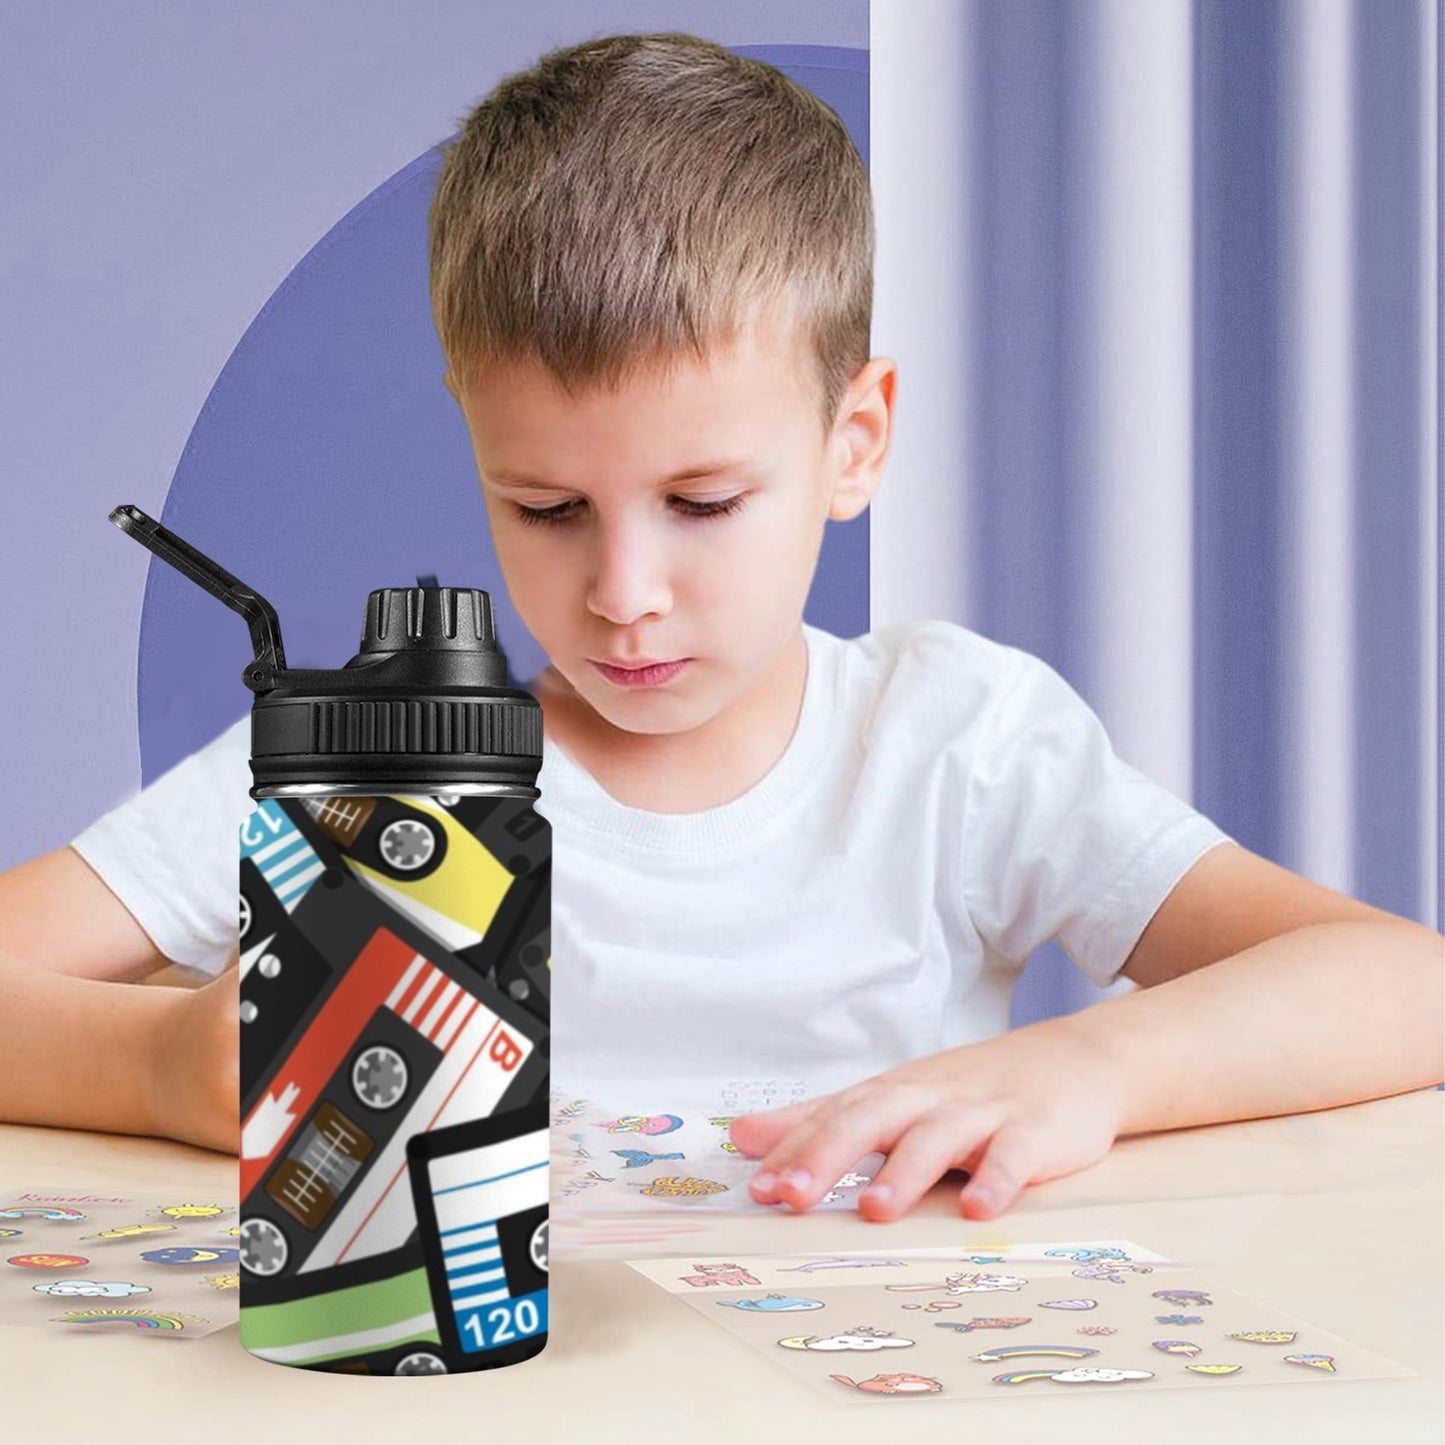 Cassette Tapes - Kids Water Bottle with Chug Lid (12 oz) Kids Water Bottle with Chug Lid